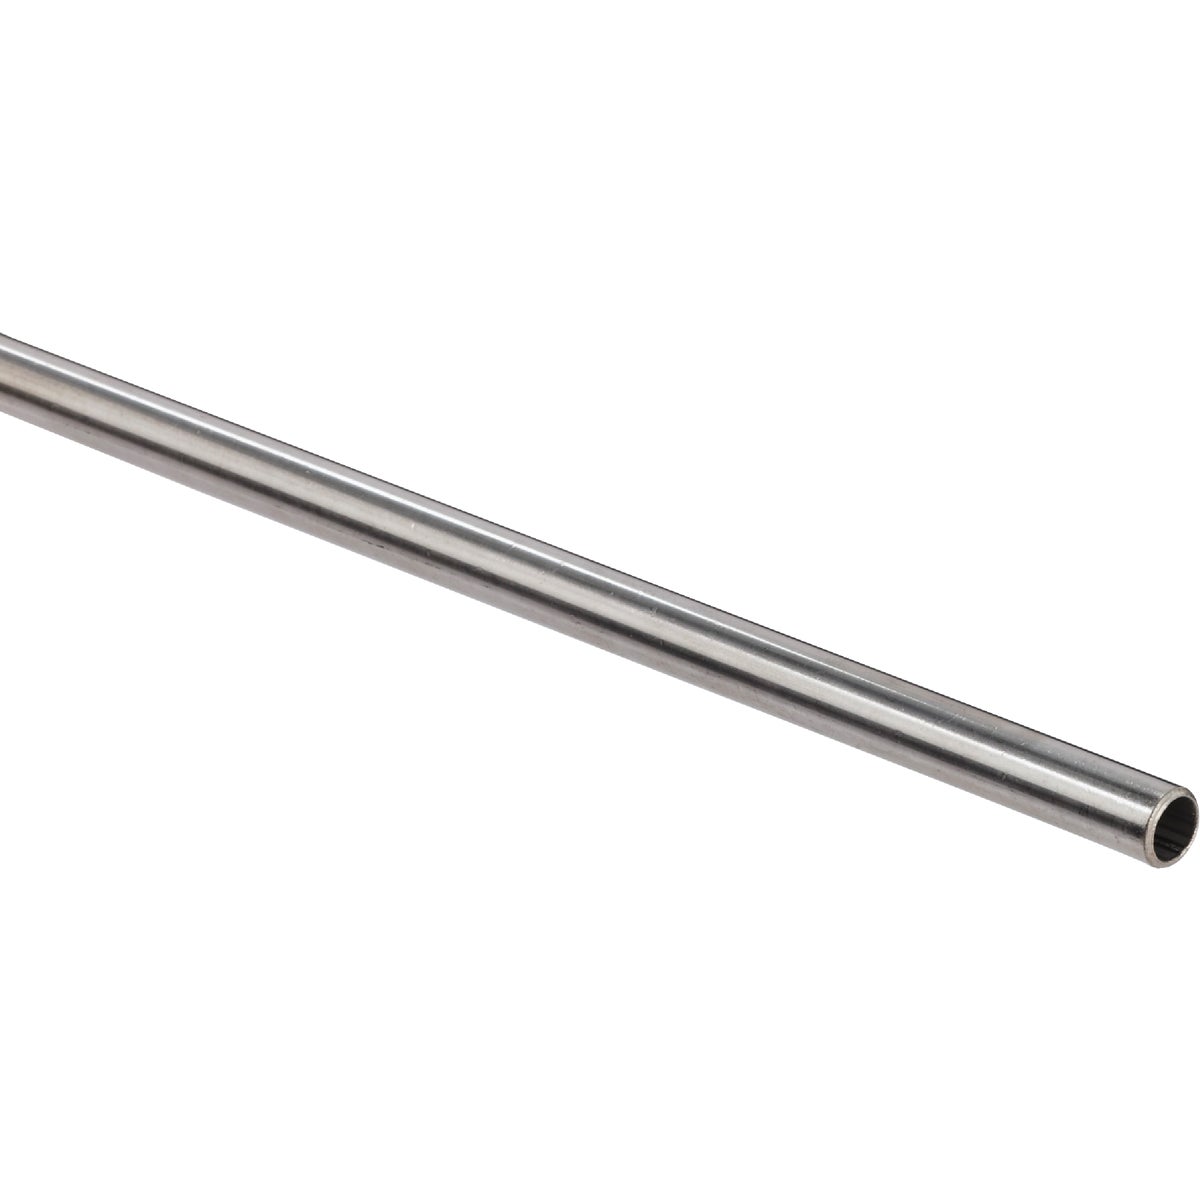 K&S Stainless Steel 3/16 In. O.D. x 1 Ft. Round Tube Stock